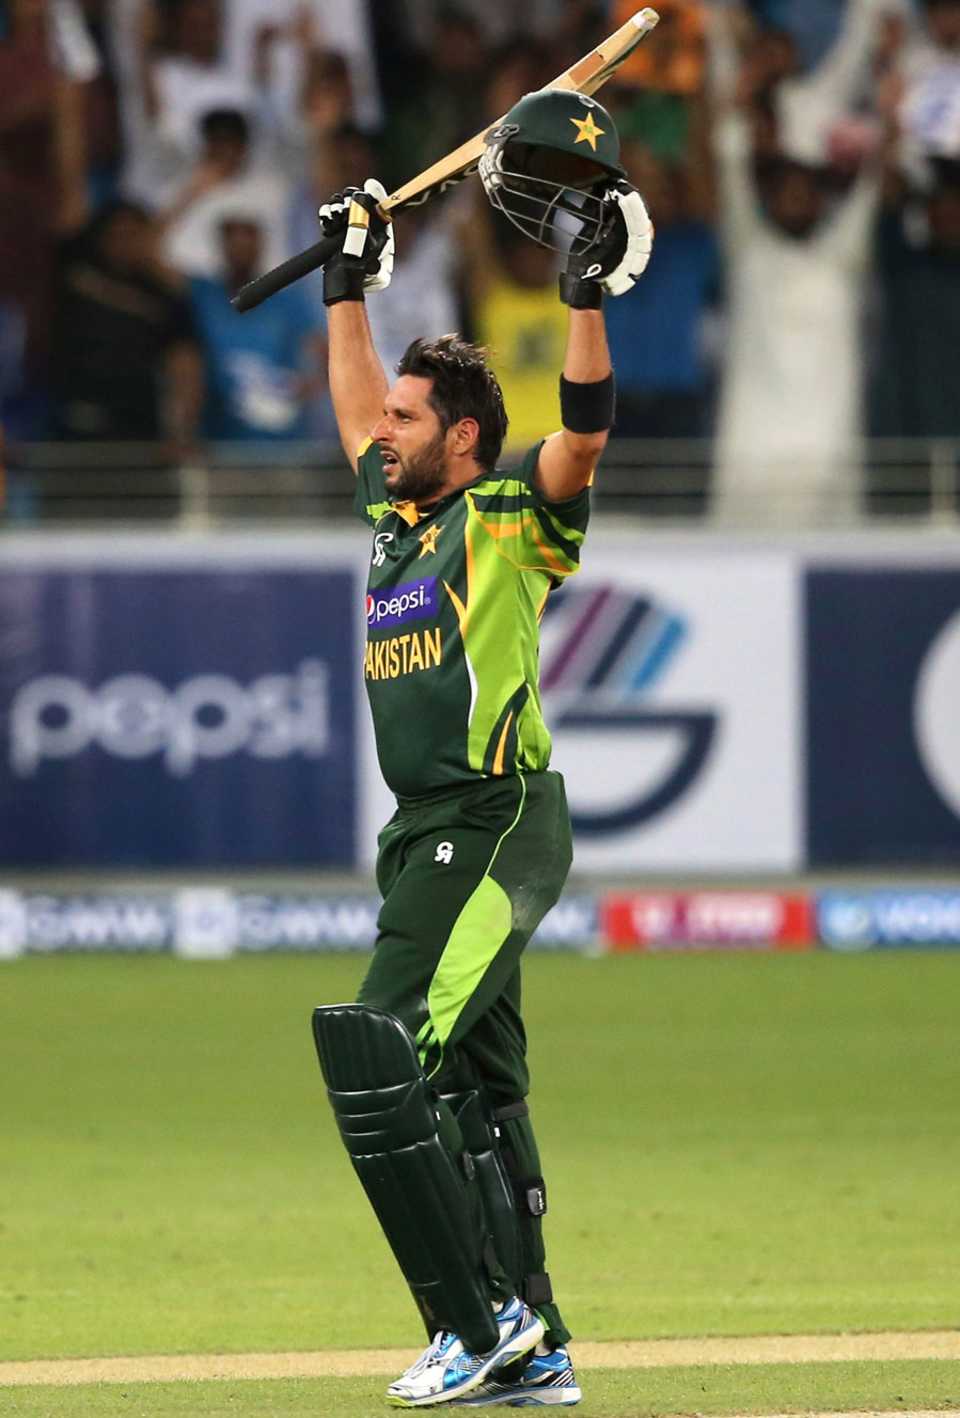 Shahid Afridi after hitting the winning six for Pakistan